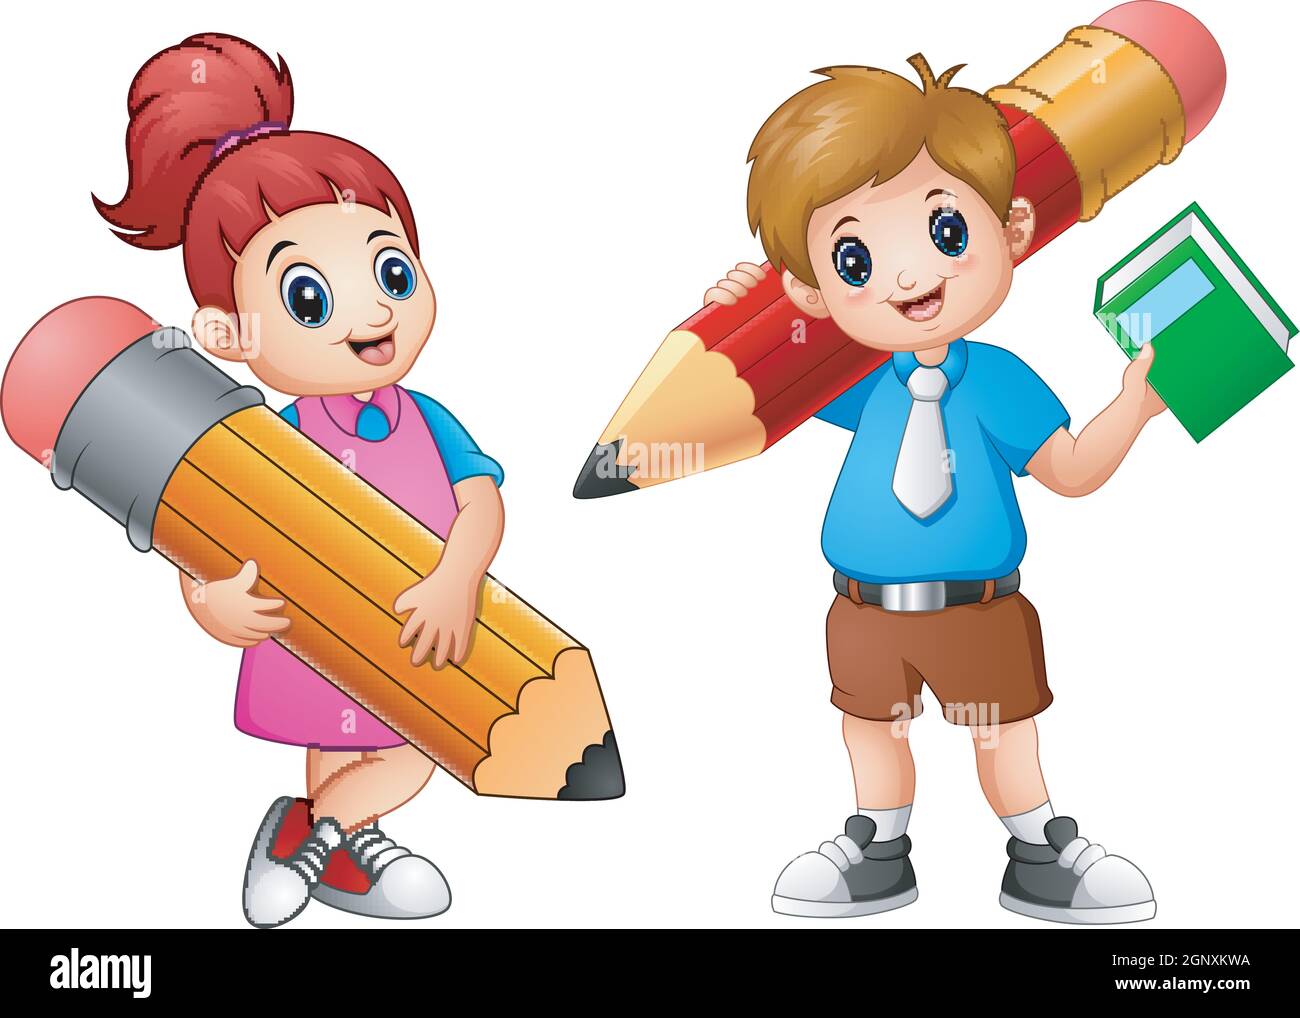 Cartoon childrens holding a pencil Stock Vector